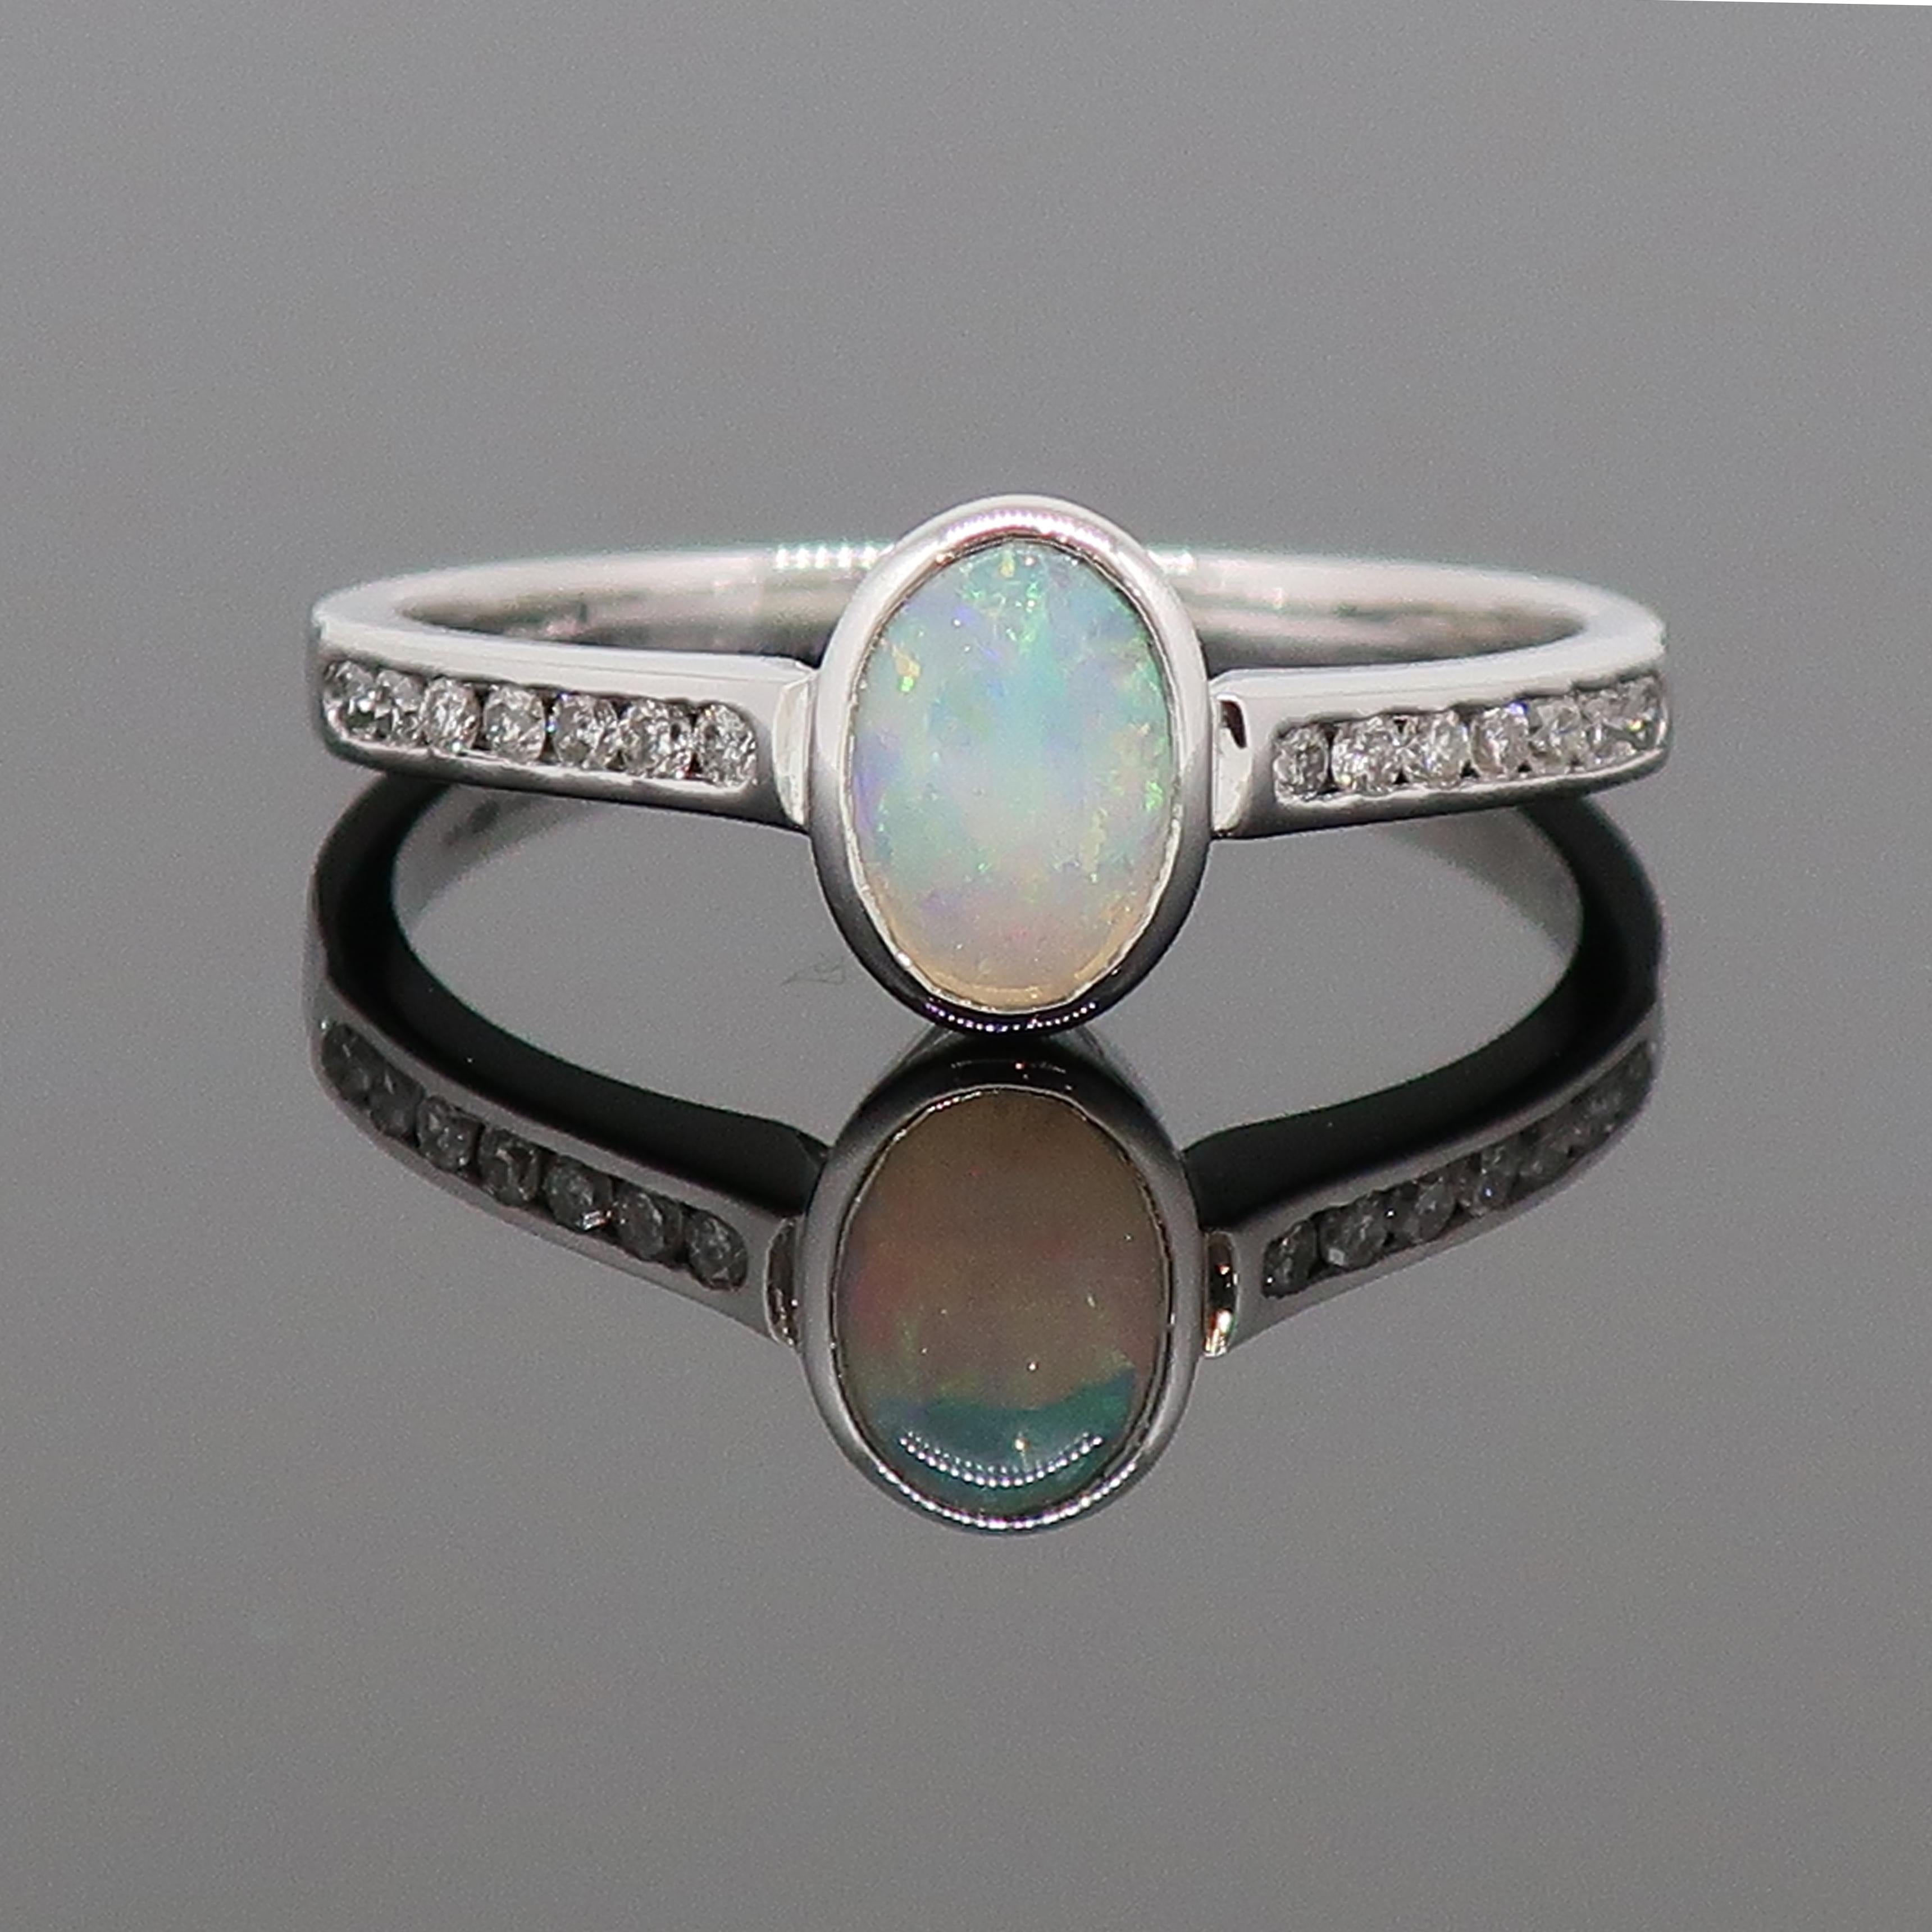 9 Karat White Gold Oval Opal Solitaire Ring With Diamond Shoulders

A dainty oval opal solitaire ring. The pretty opal is set in a delicate rub over setting, with channel set brilliant cut diamond shoulders. Each shoulder consisting of seven